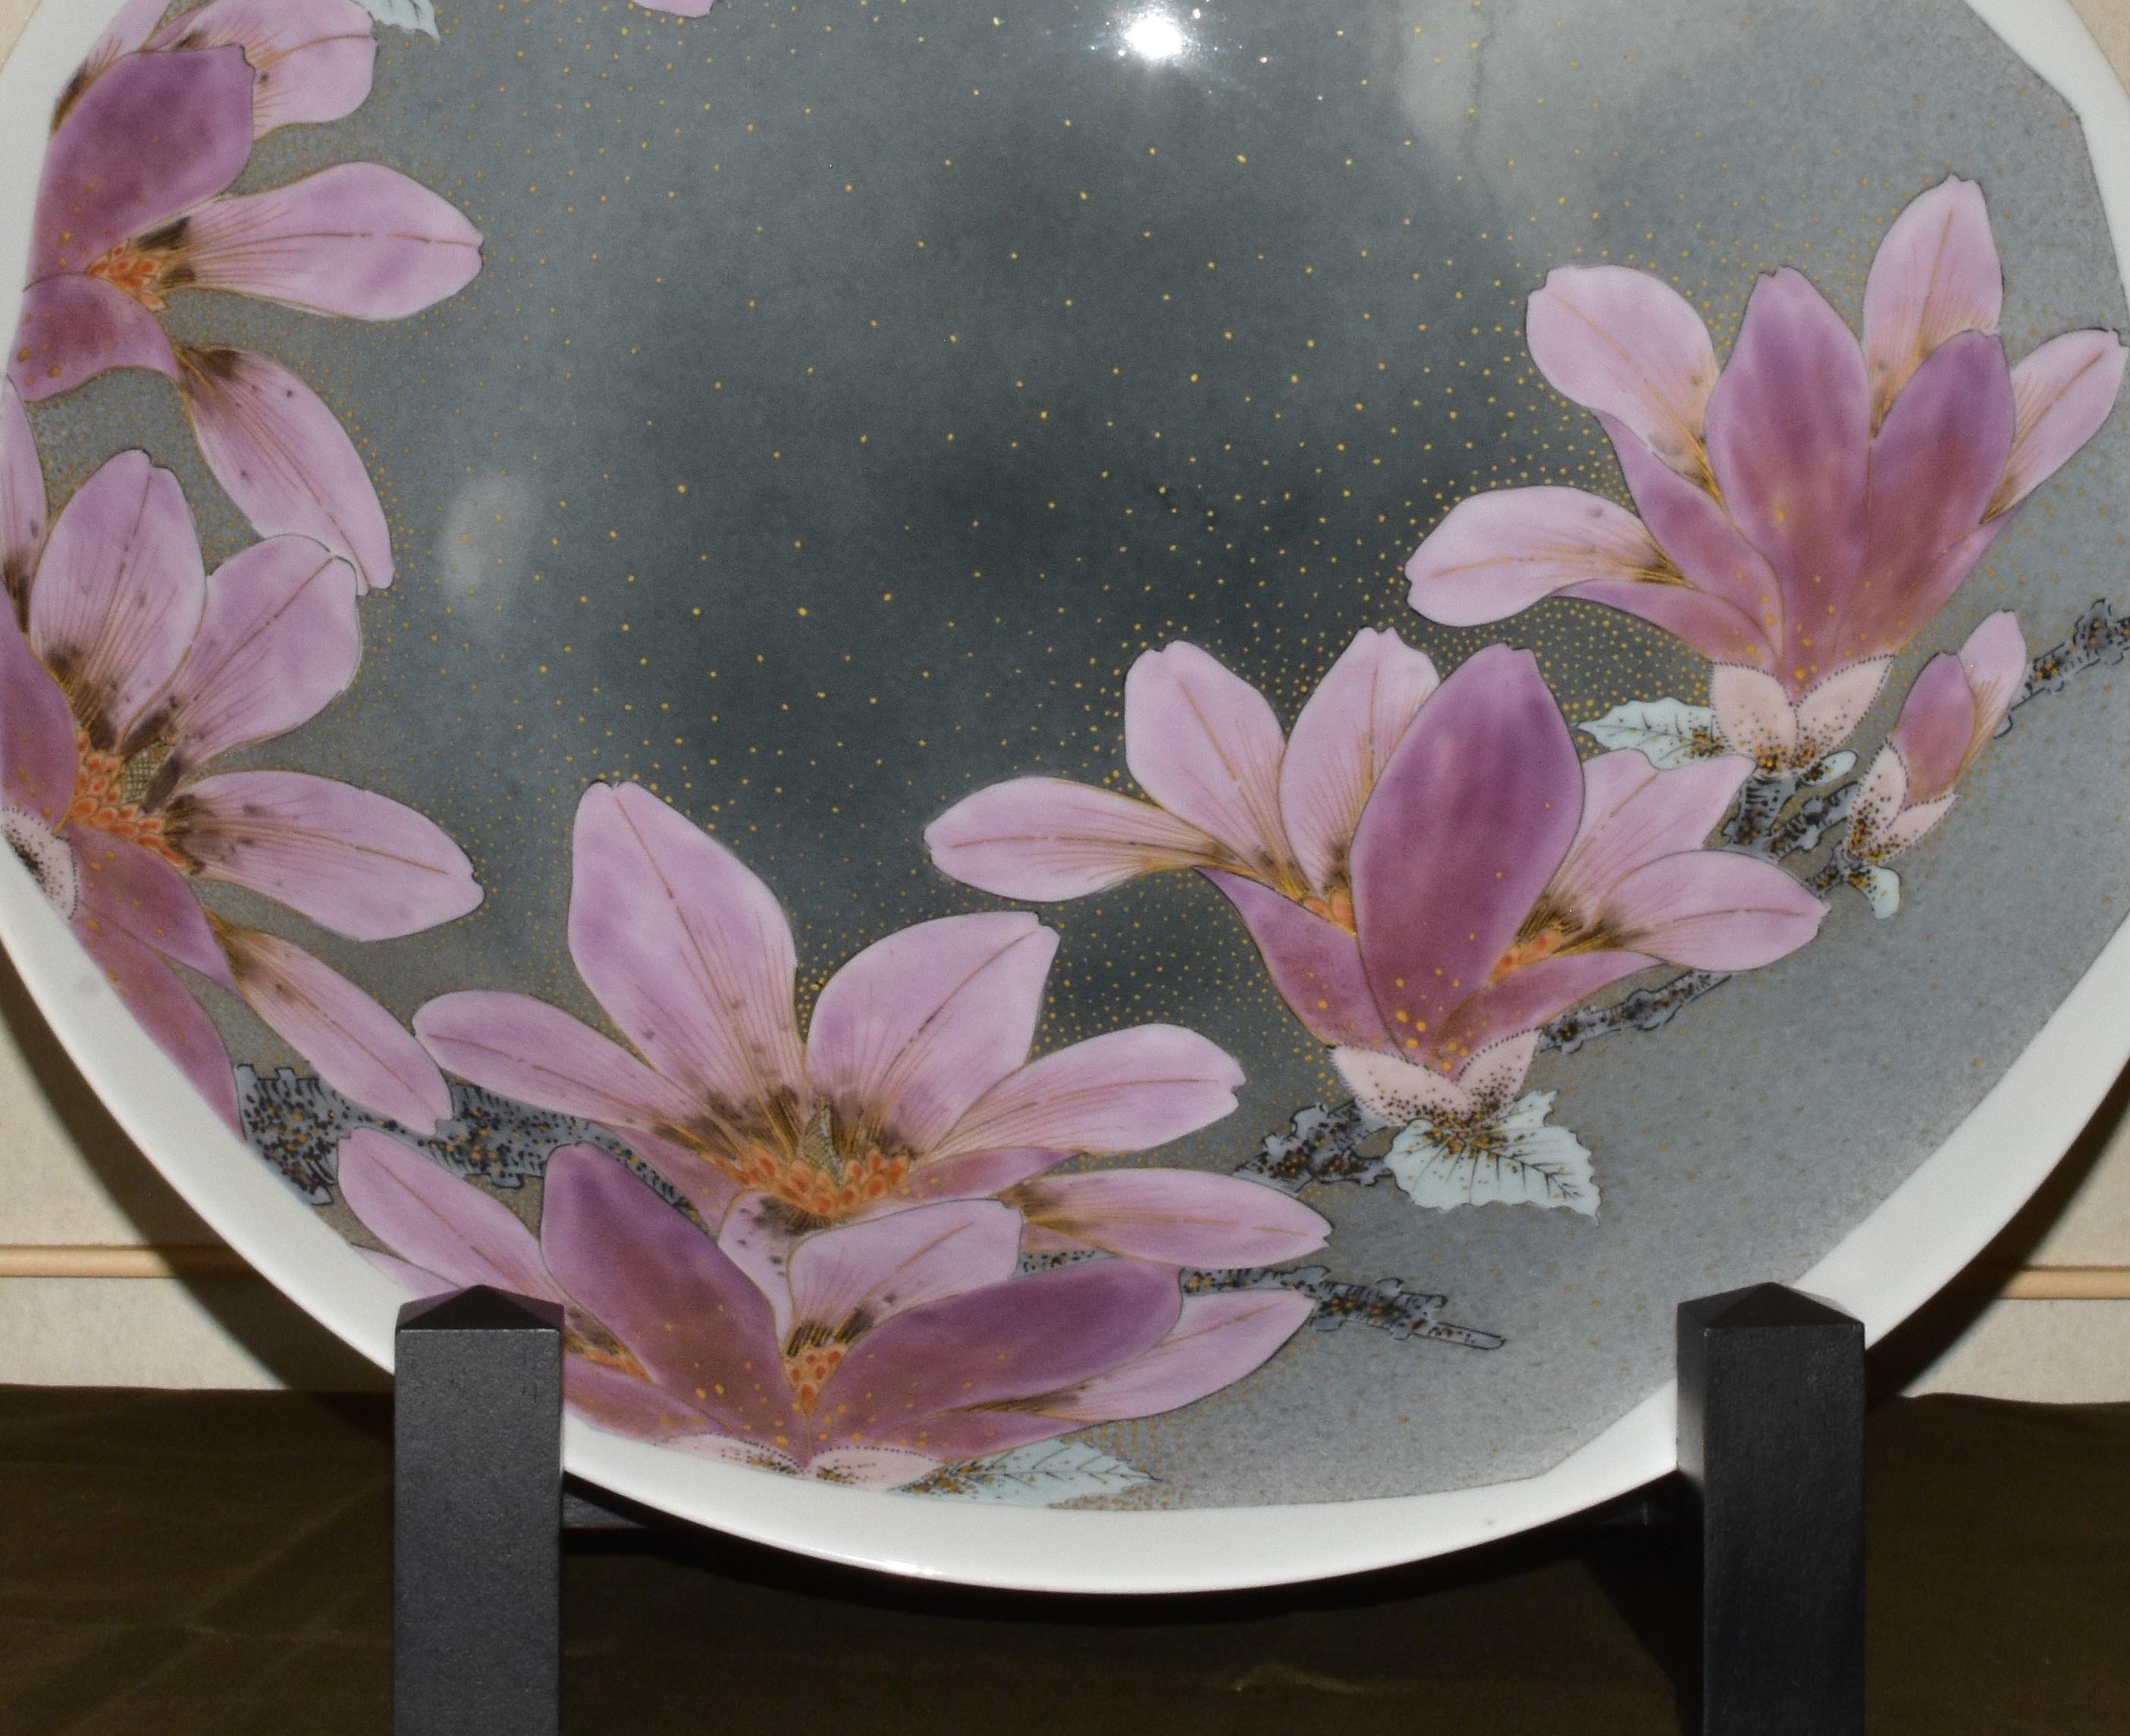 Exceptional Japanese contemporary museum-quality large decorative porcelain deep charger/centerpiece dramatically hand-painted showcasing bold pink/purple magnolia flowers in full bloom set against a beautiful background of stunning gradations in